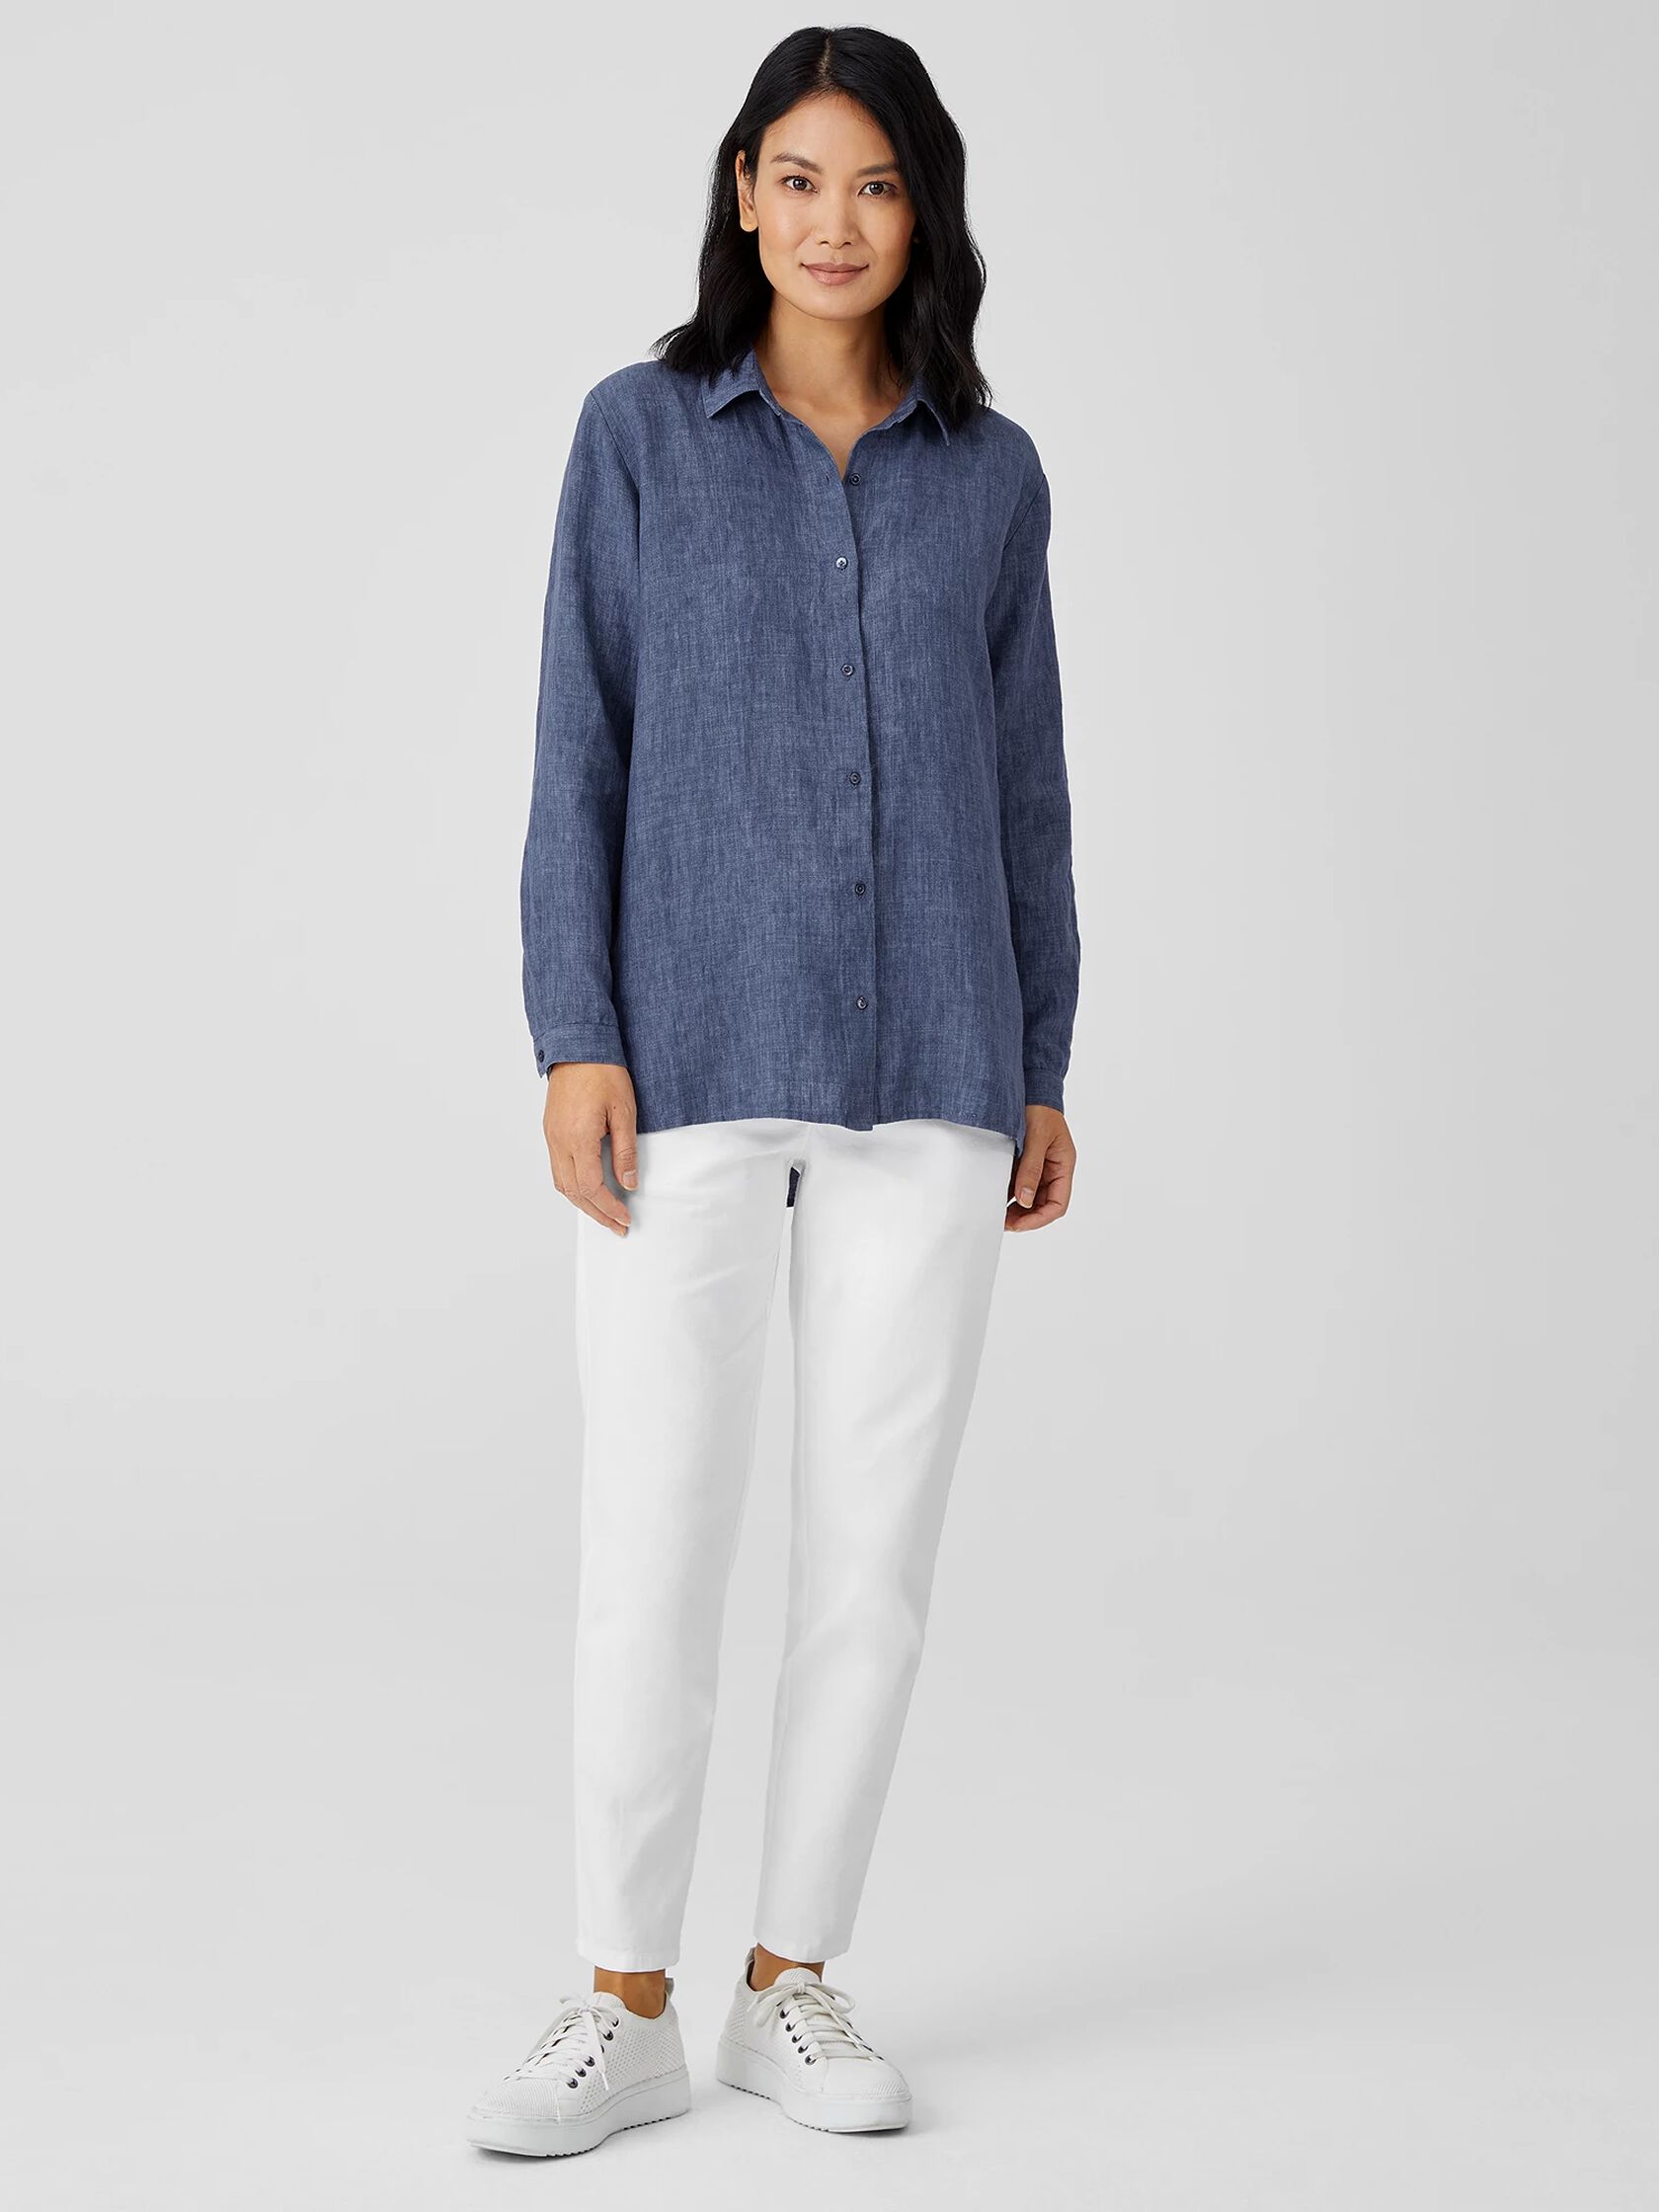 Washed Organic Linen Delave Classic Collar Shirt | EILEEN FISHER